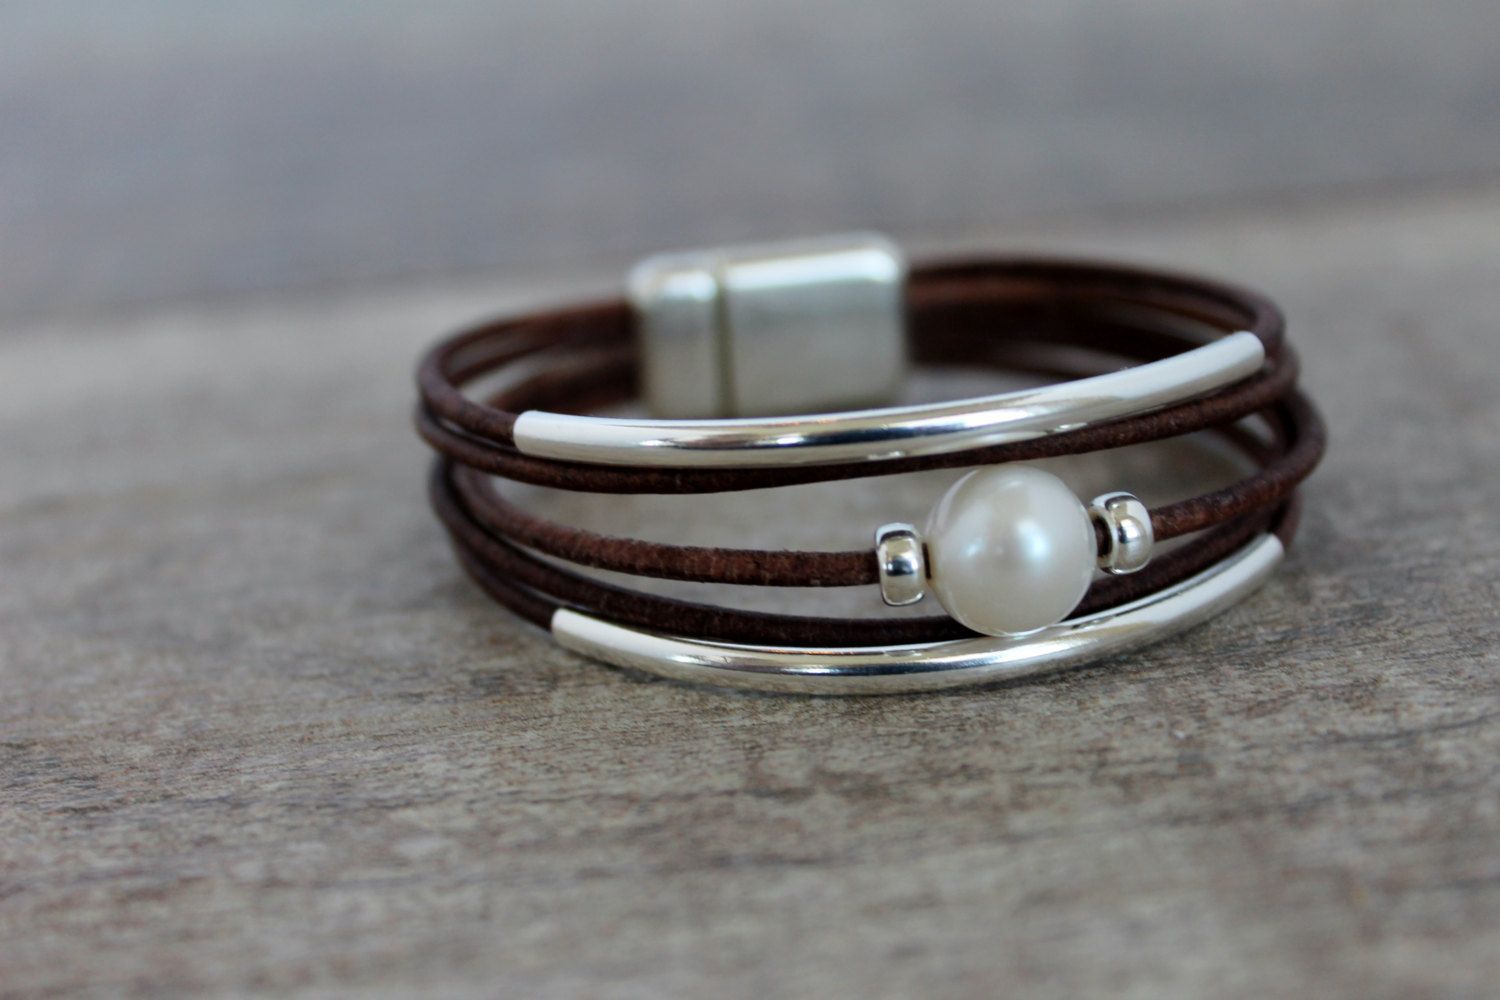 Leather Bracelet/ Sterling Silver Solitaire Pearl Bracelet/Women's Leather Bracelet/Simple  Chic/Isea Designs - Leather Bracelet/ Sterling Silver Solitaire Pearl Bracelet/Women's Leather Bracelet/Simple  Chic/Isea Designs -   16 diy Bracelets metal ideas